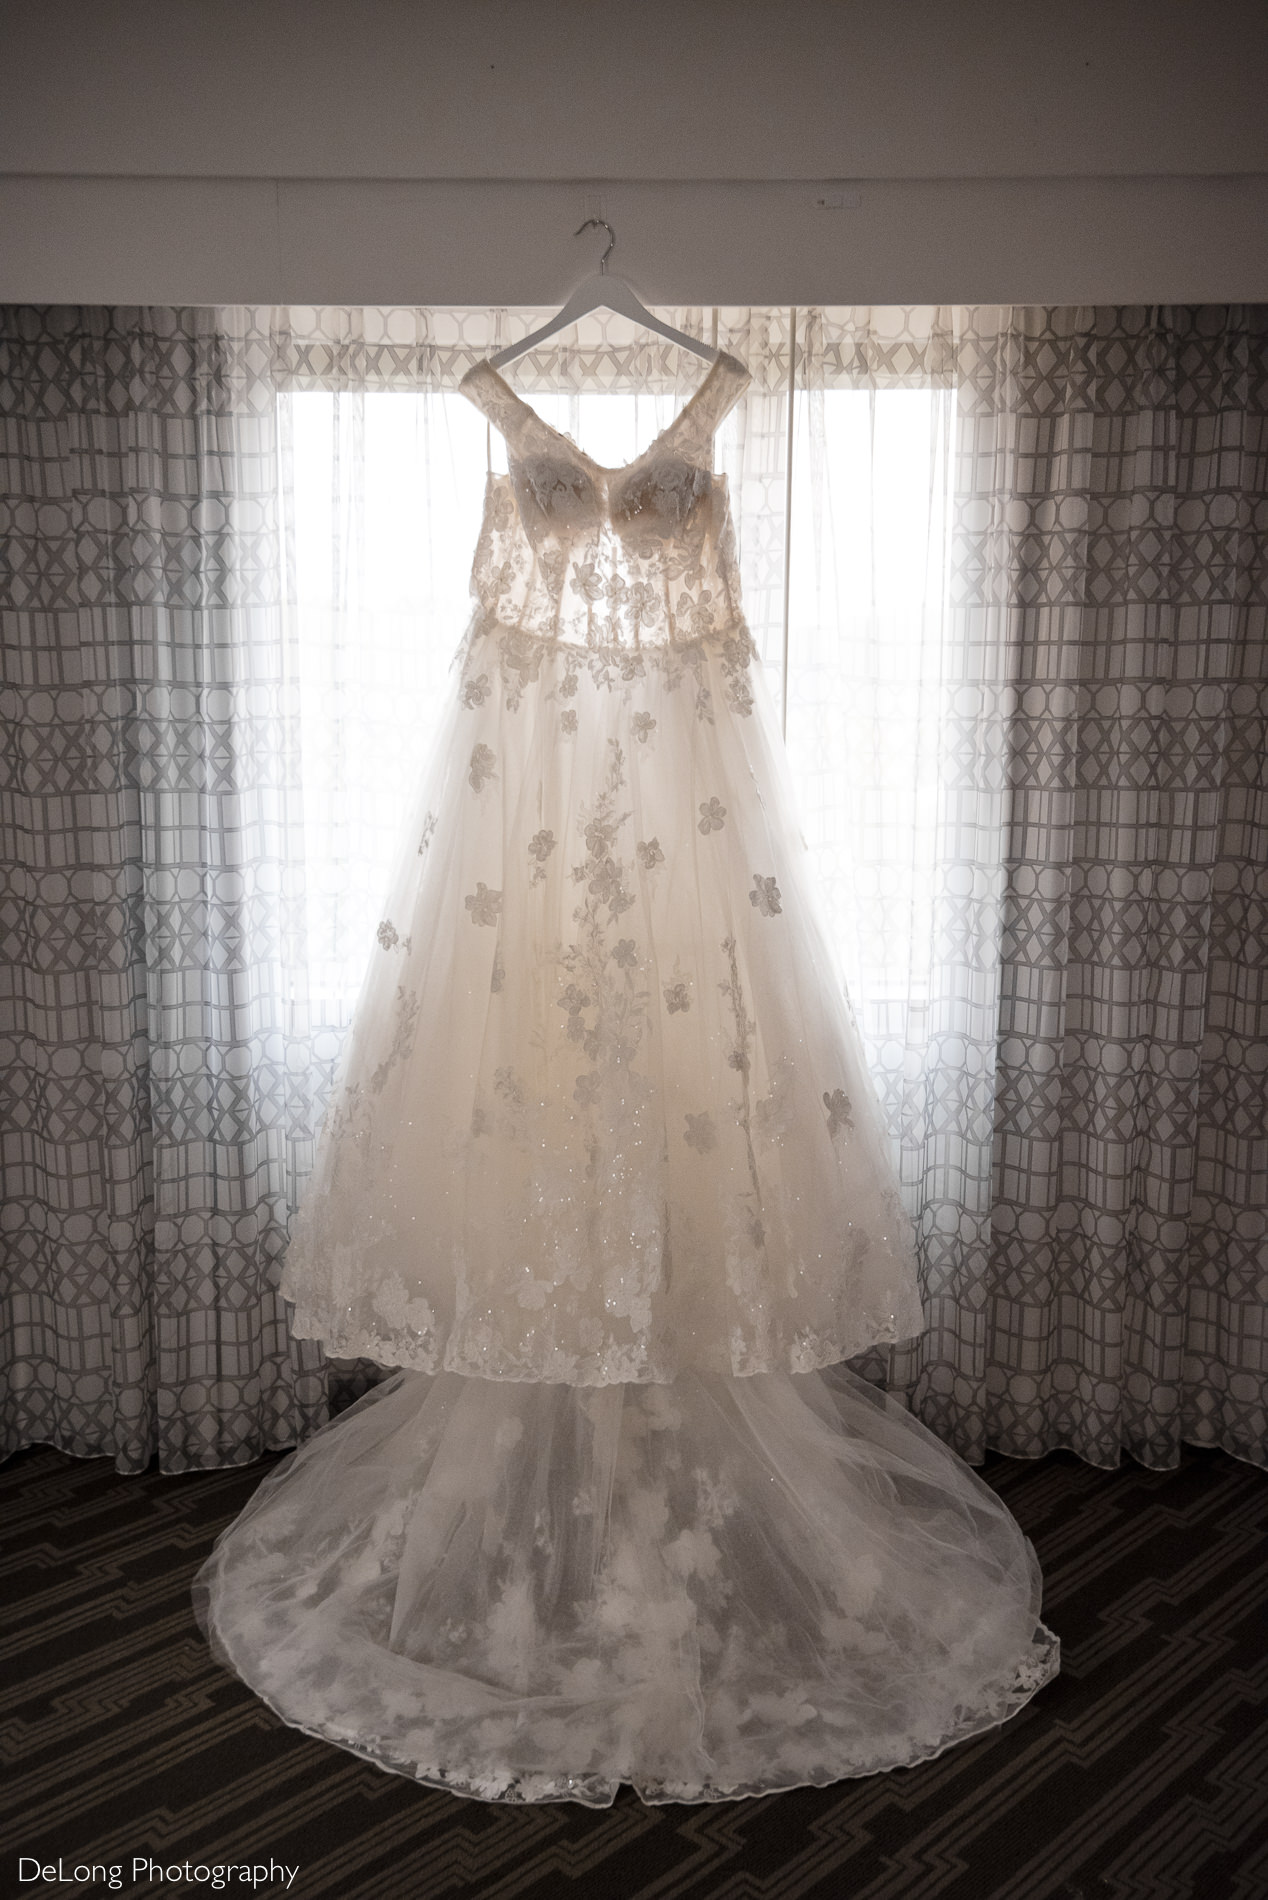 Bride's wedding dress hanging in Embassy Suites by Hilton Charlotte window by Charlotte wedding photographers DeLong Photography